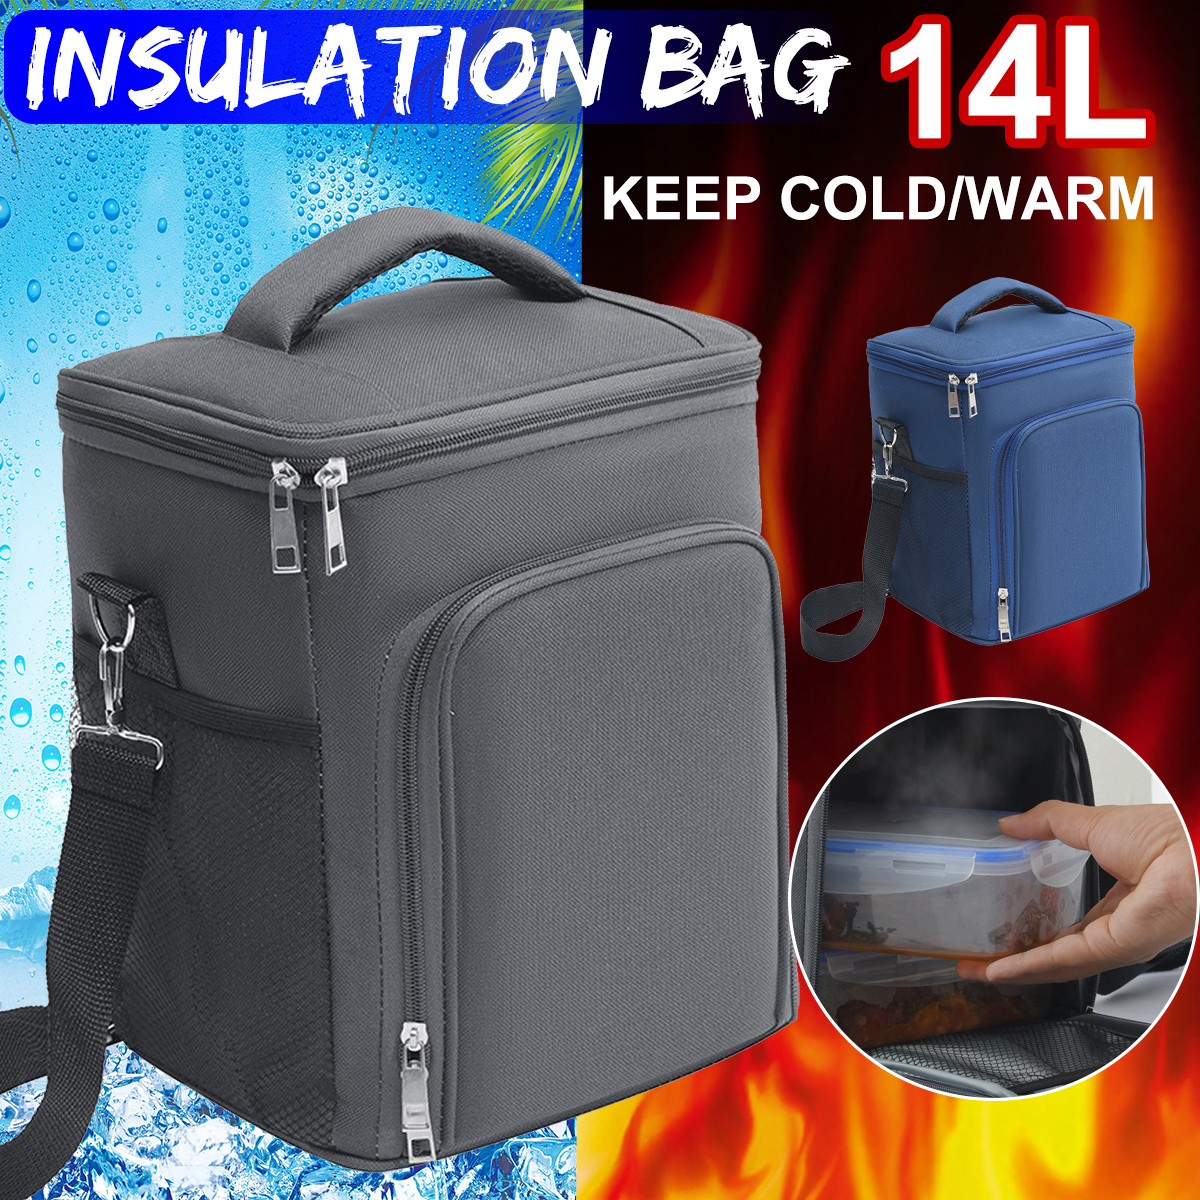 14L-Insulated-Picnic-Bag-Carry-Lunch-Bag-Thermal-Handbag-Outdoor-Camping-Travel-1872425-1